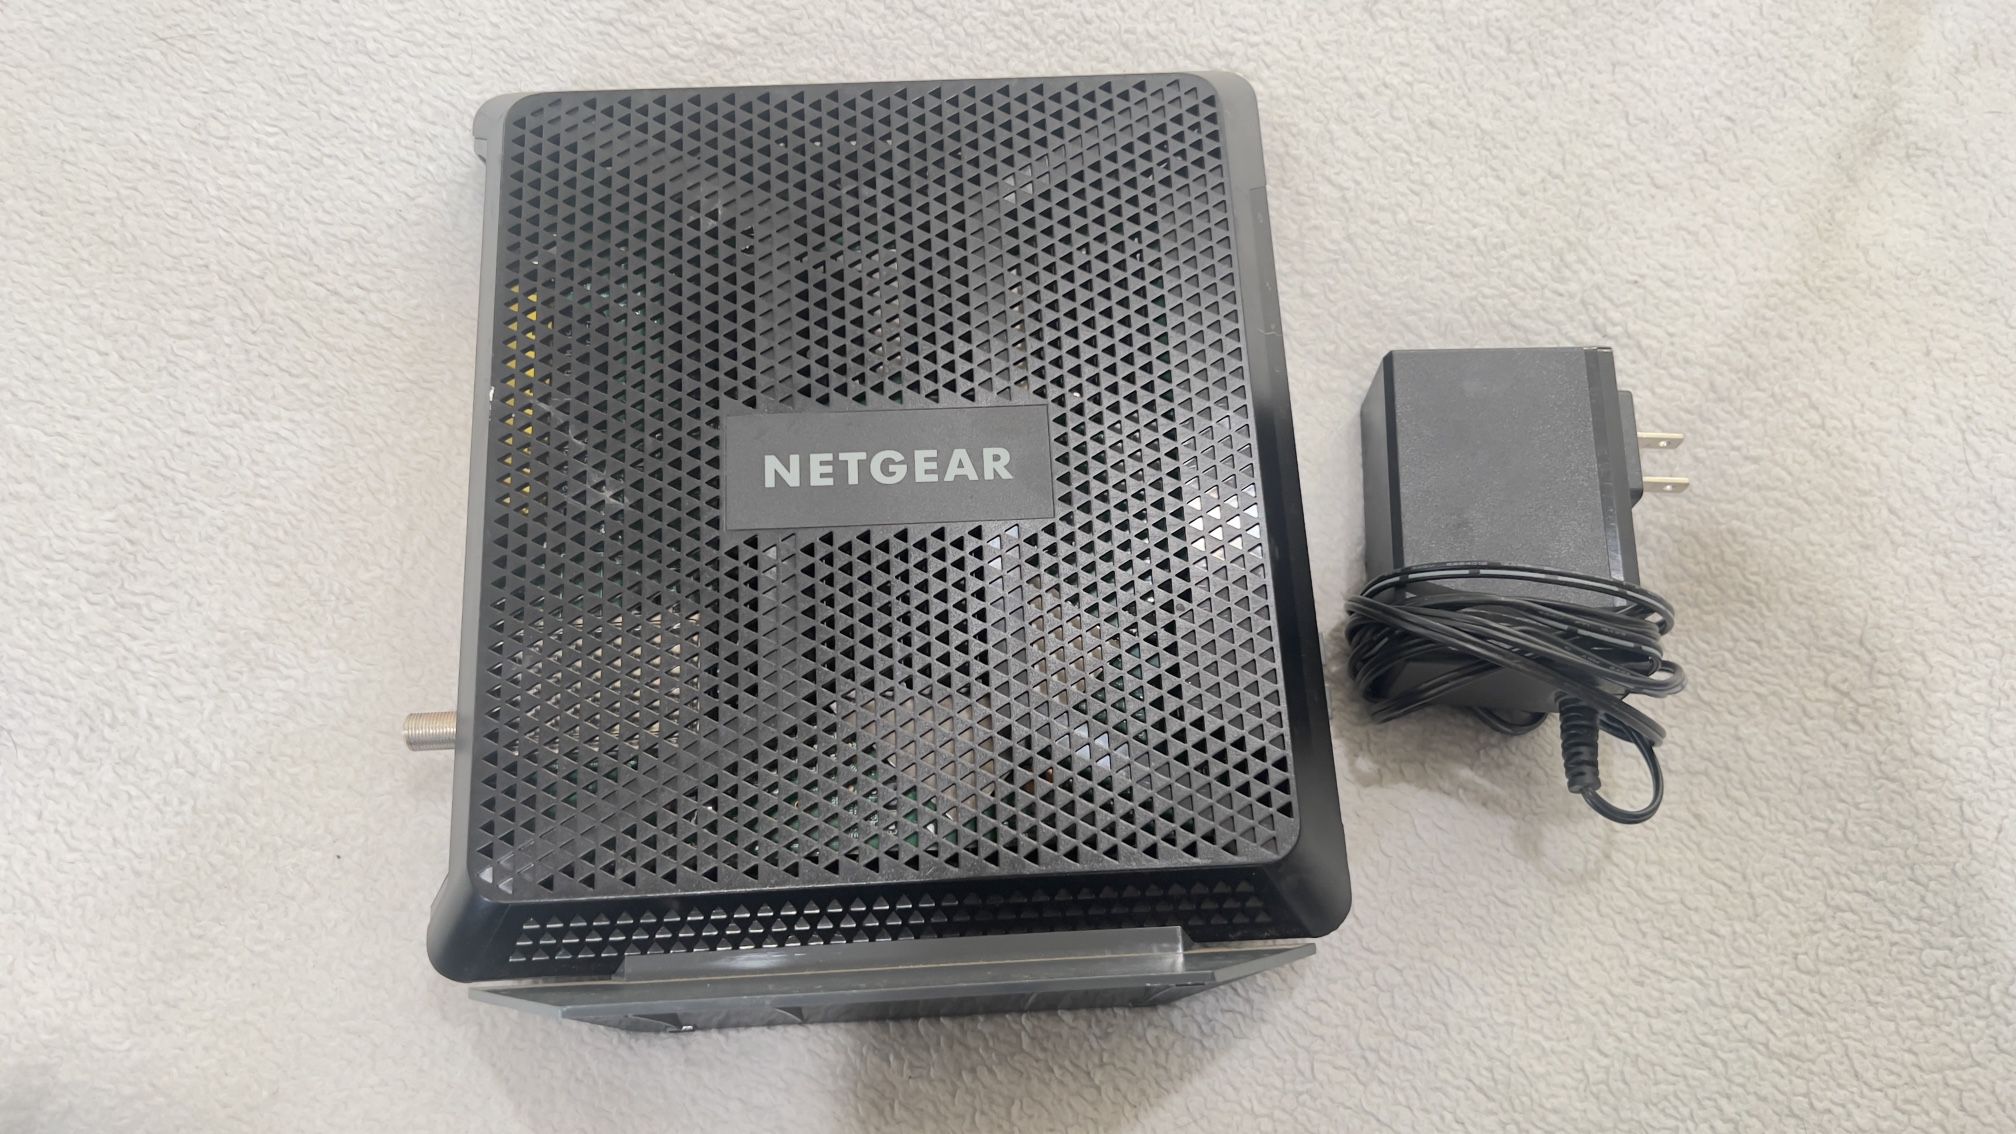 Netgear 85 Router Nighthawk Pre-Owned C7000v2 WiFi Cable Modem AC1900 